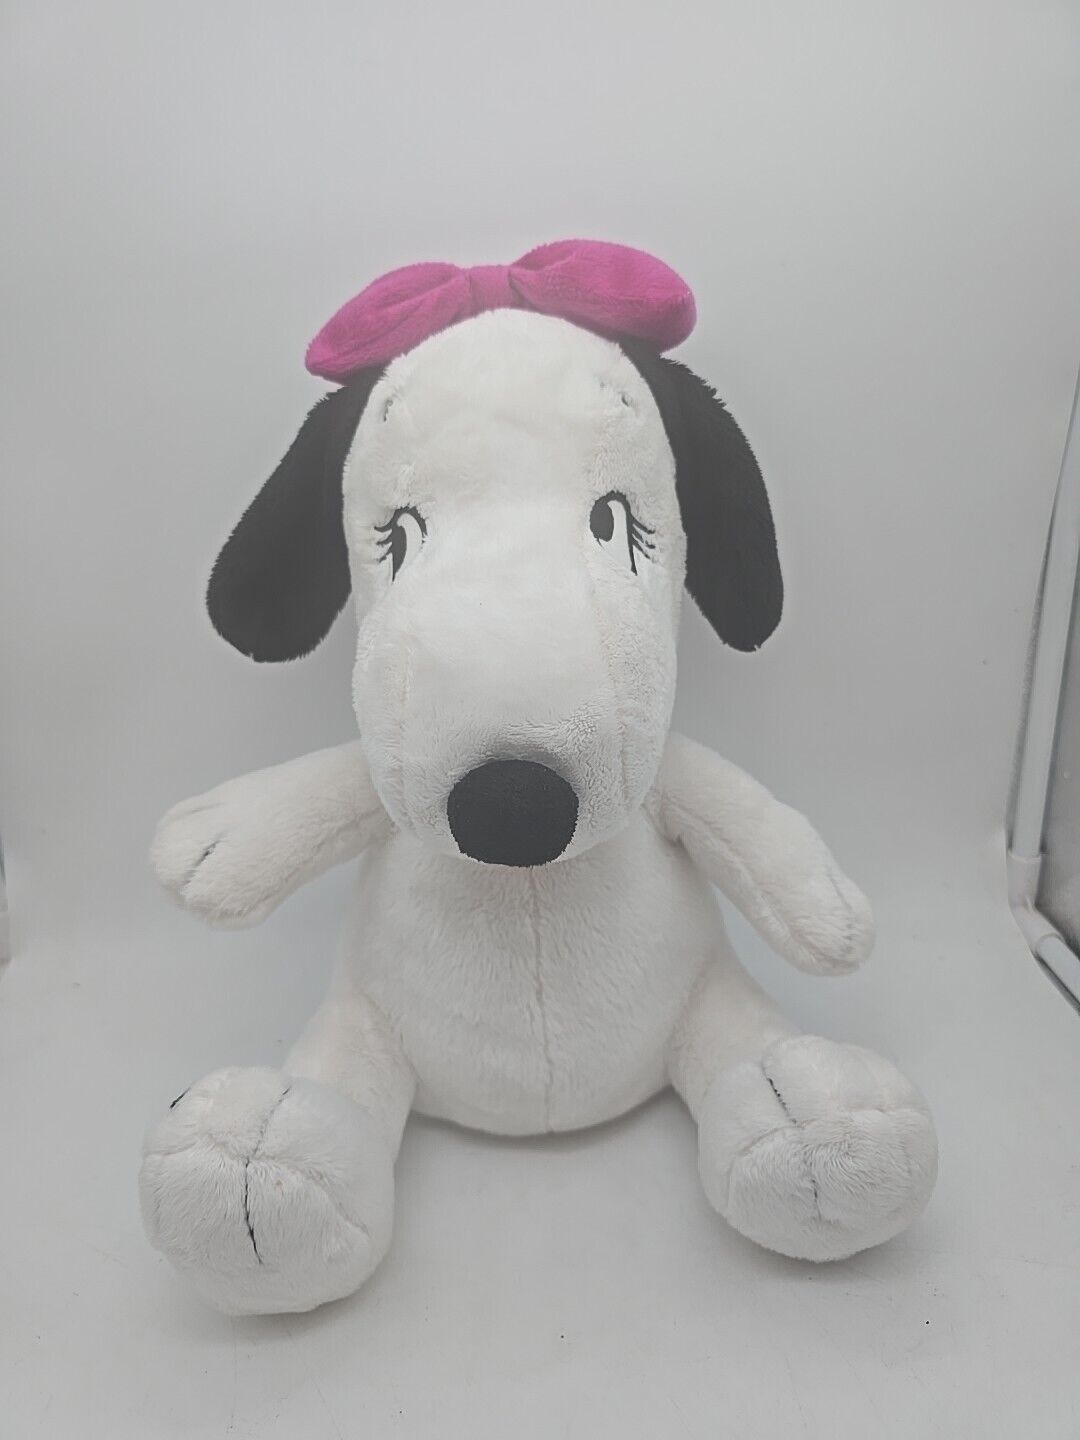 Snoopy\'s Sister Belle. Peanuts. 2014, 12 Inch Plush Belle.